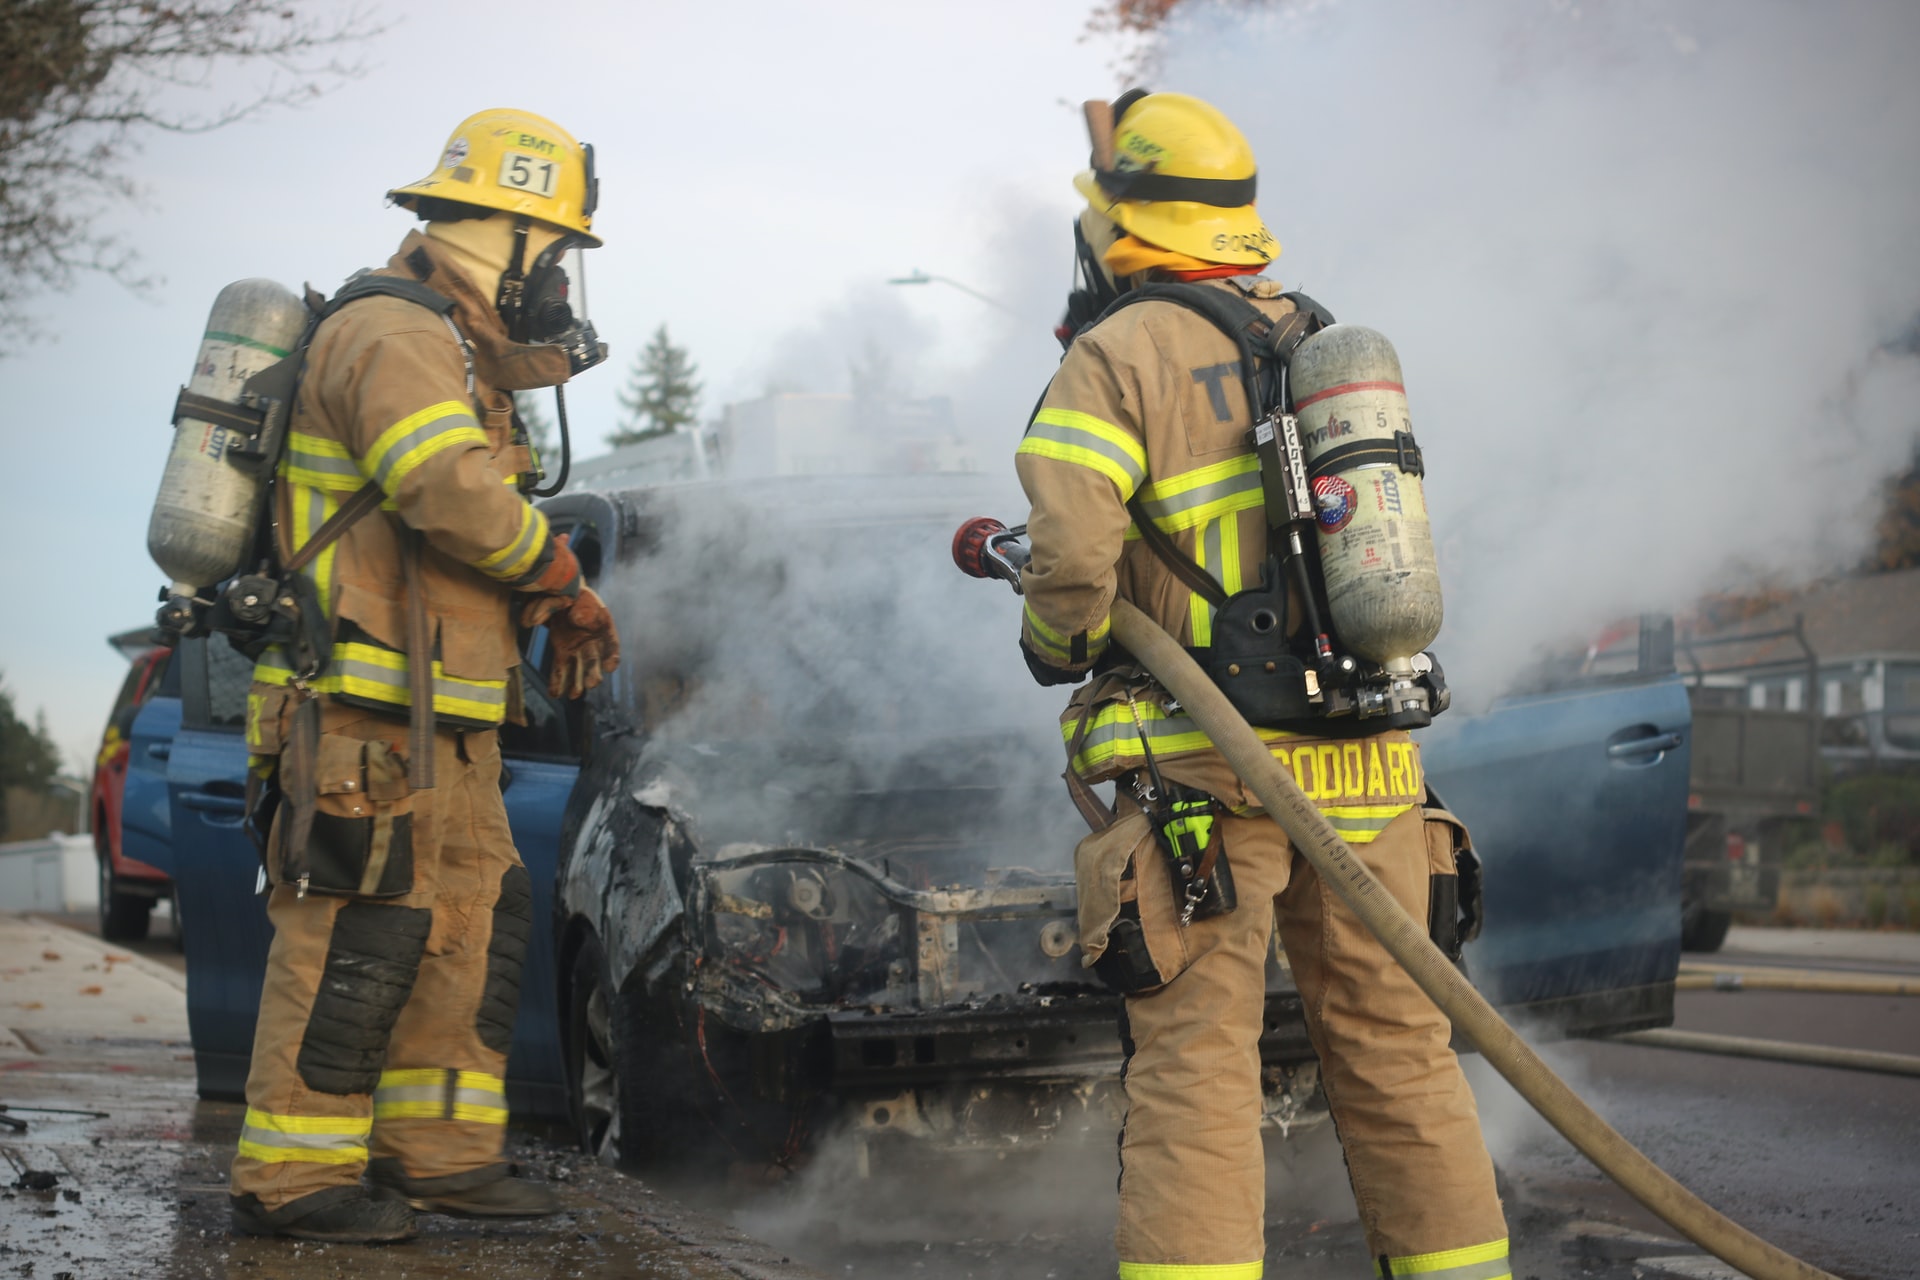 A new study has some surprising findings on car fires